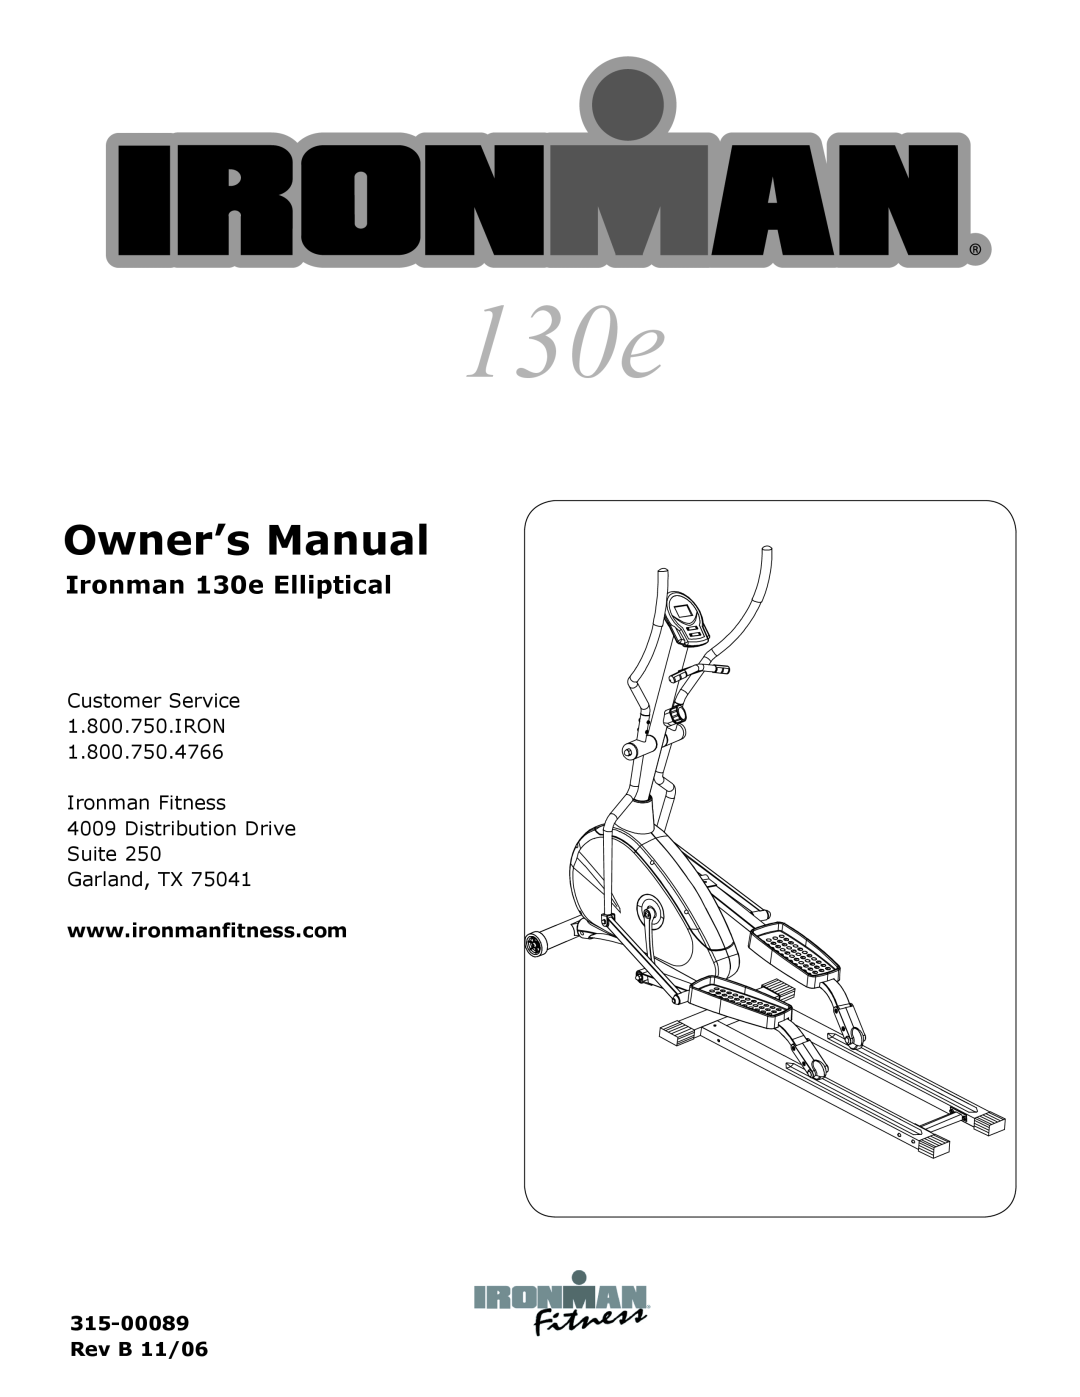 Ironman Fitness owner manual Owner’s Manual, Ironman 130e Elliptical 